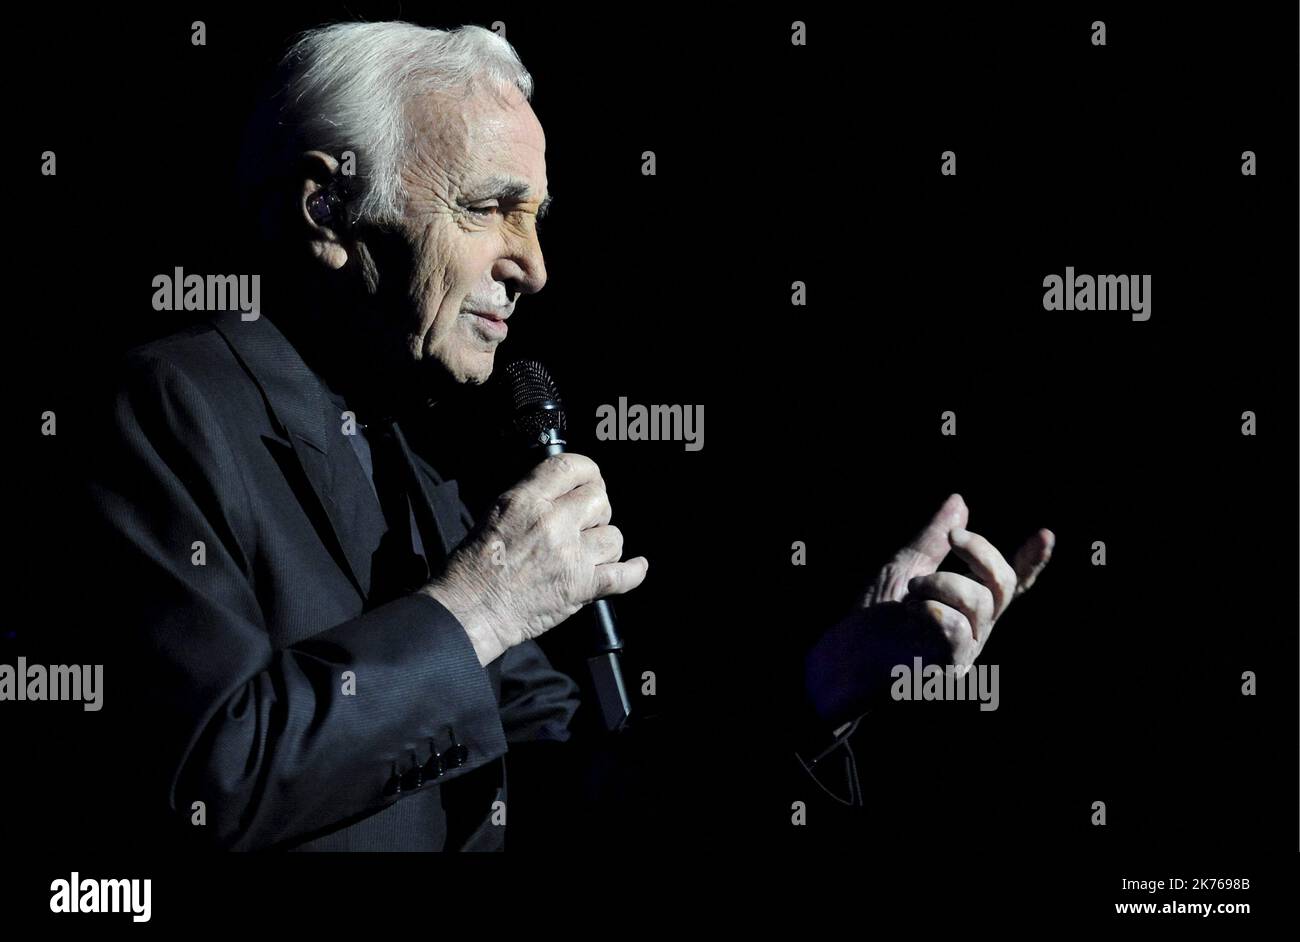 CHARLES AZNAVOUR AT THE ZENITH OF TOULOUSE / SONG TOUR CHANSON SONGS MUSIC HALL  French singer and songwriter Charles Aznavour has died at 94 after a career lasting more than 80 years, a spokesman says. The French and Armenian performer sold over 180 million records. Stock Photo